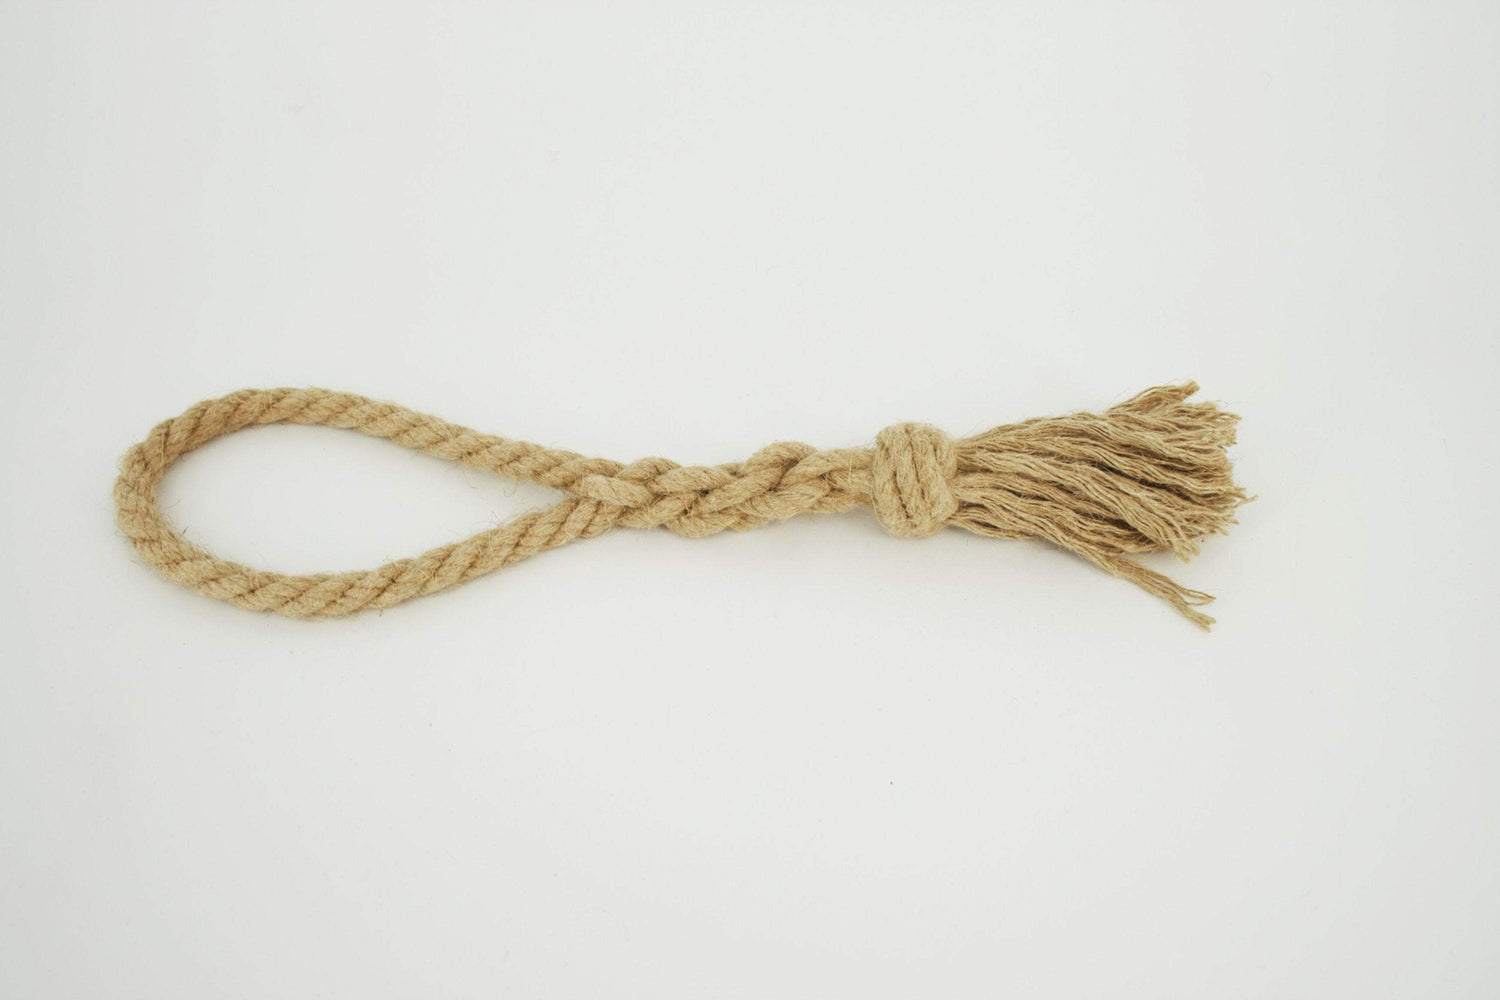 natural hemp rope tug toy for dogs